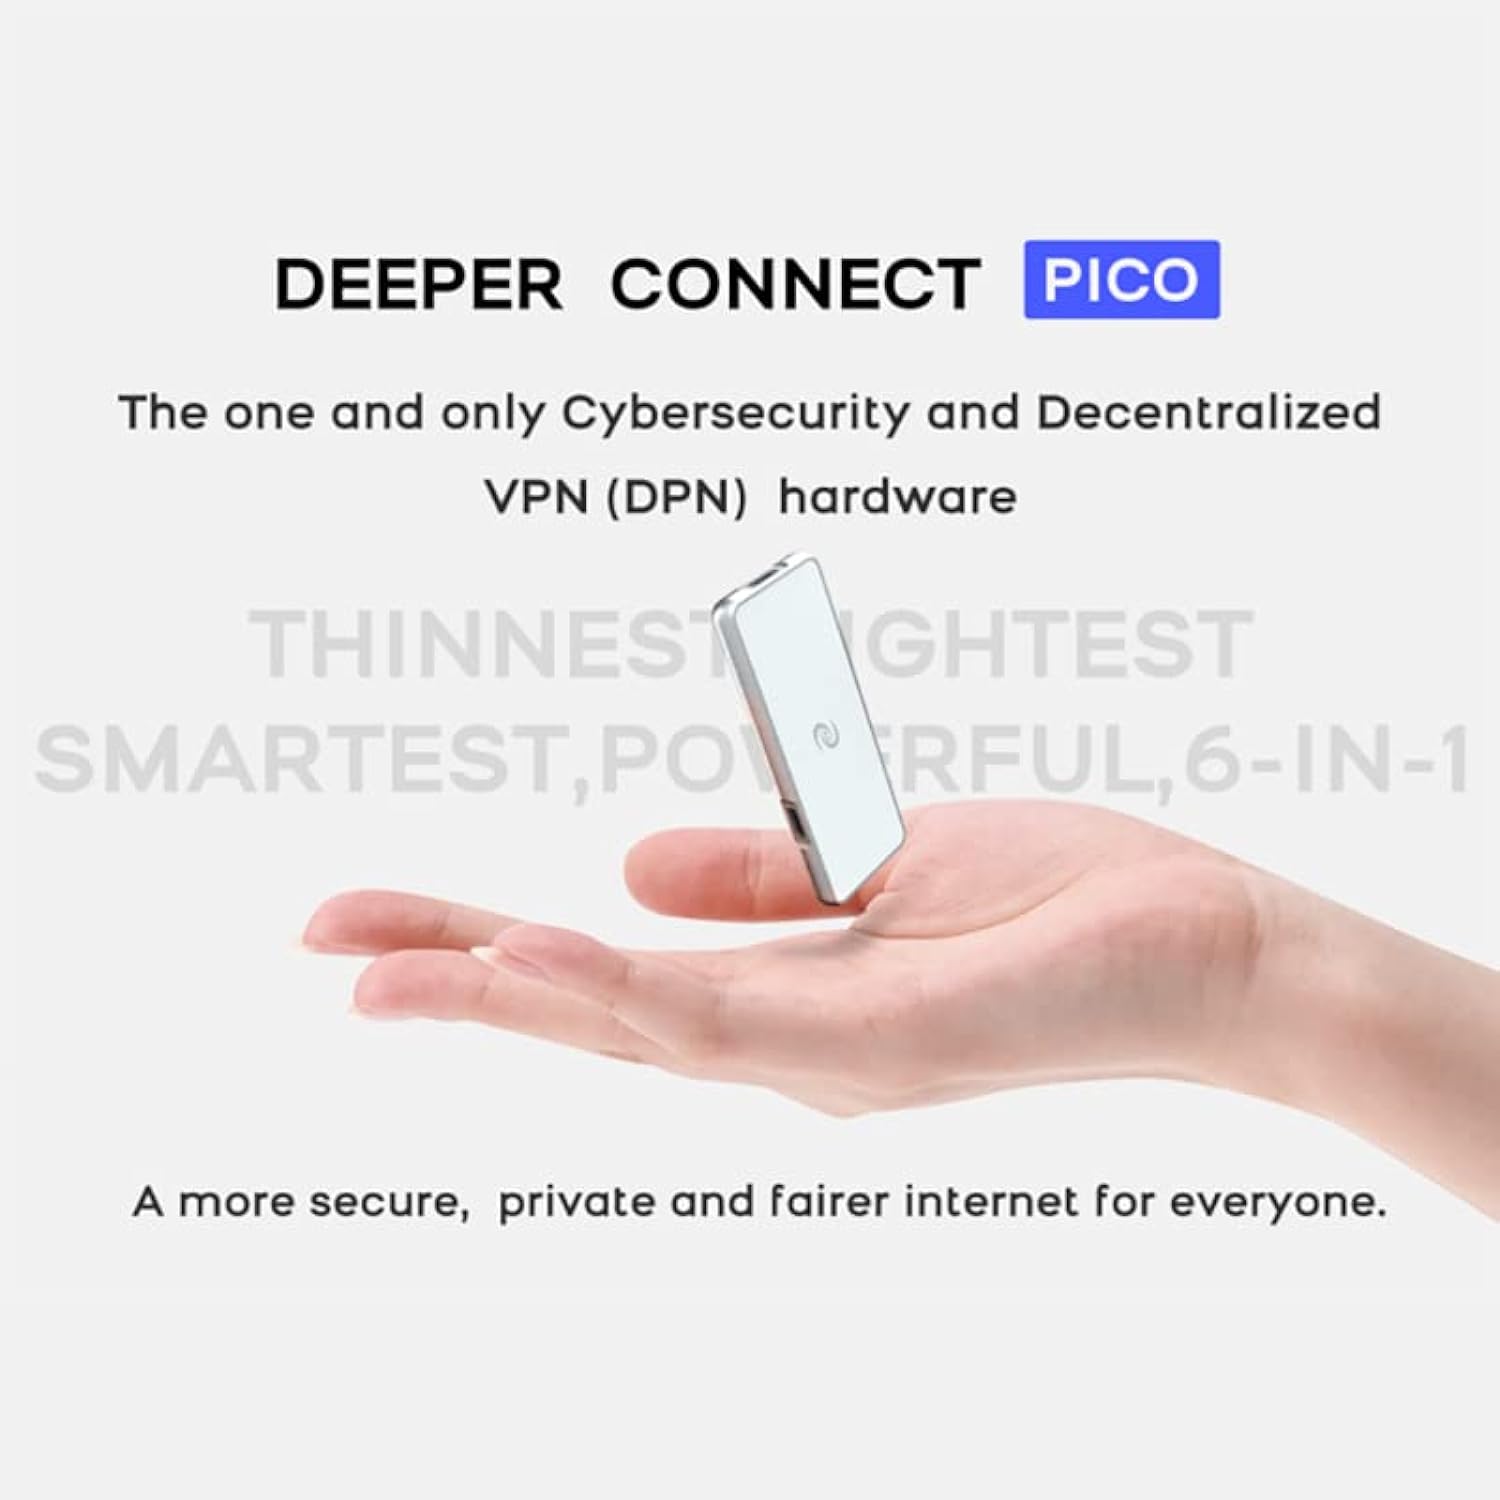 Great Choice Products Deeper Connect Pico - Unlimited Smart Vpn Router/Miner With Life Time | Ad Blocking | Work From Home | Hardware Firewall…